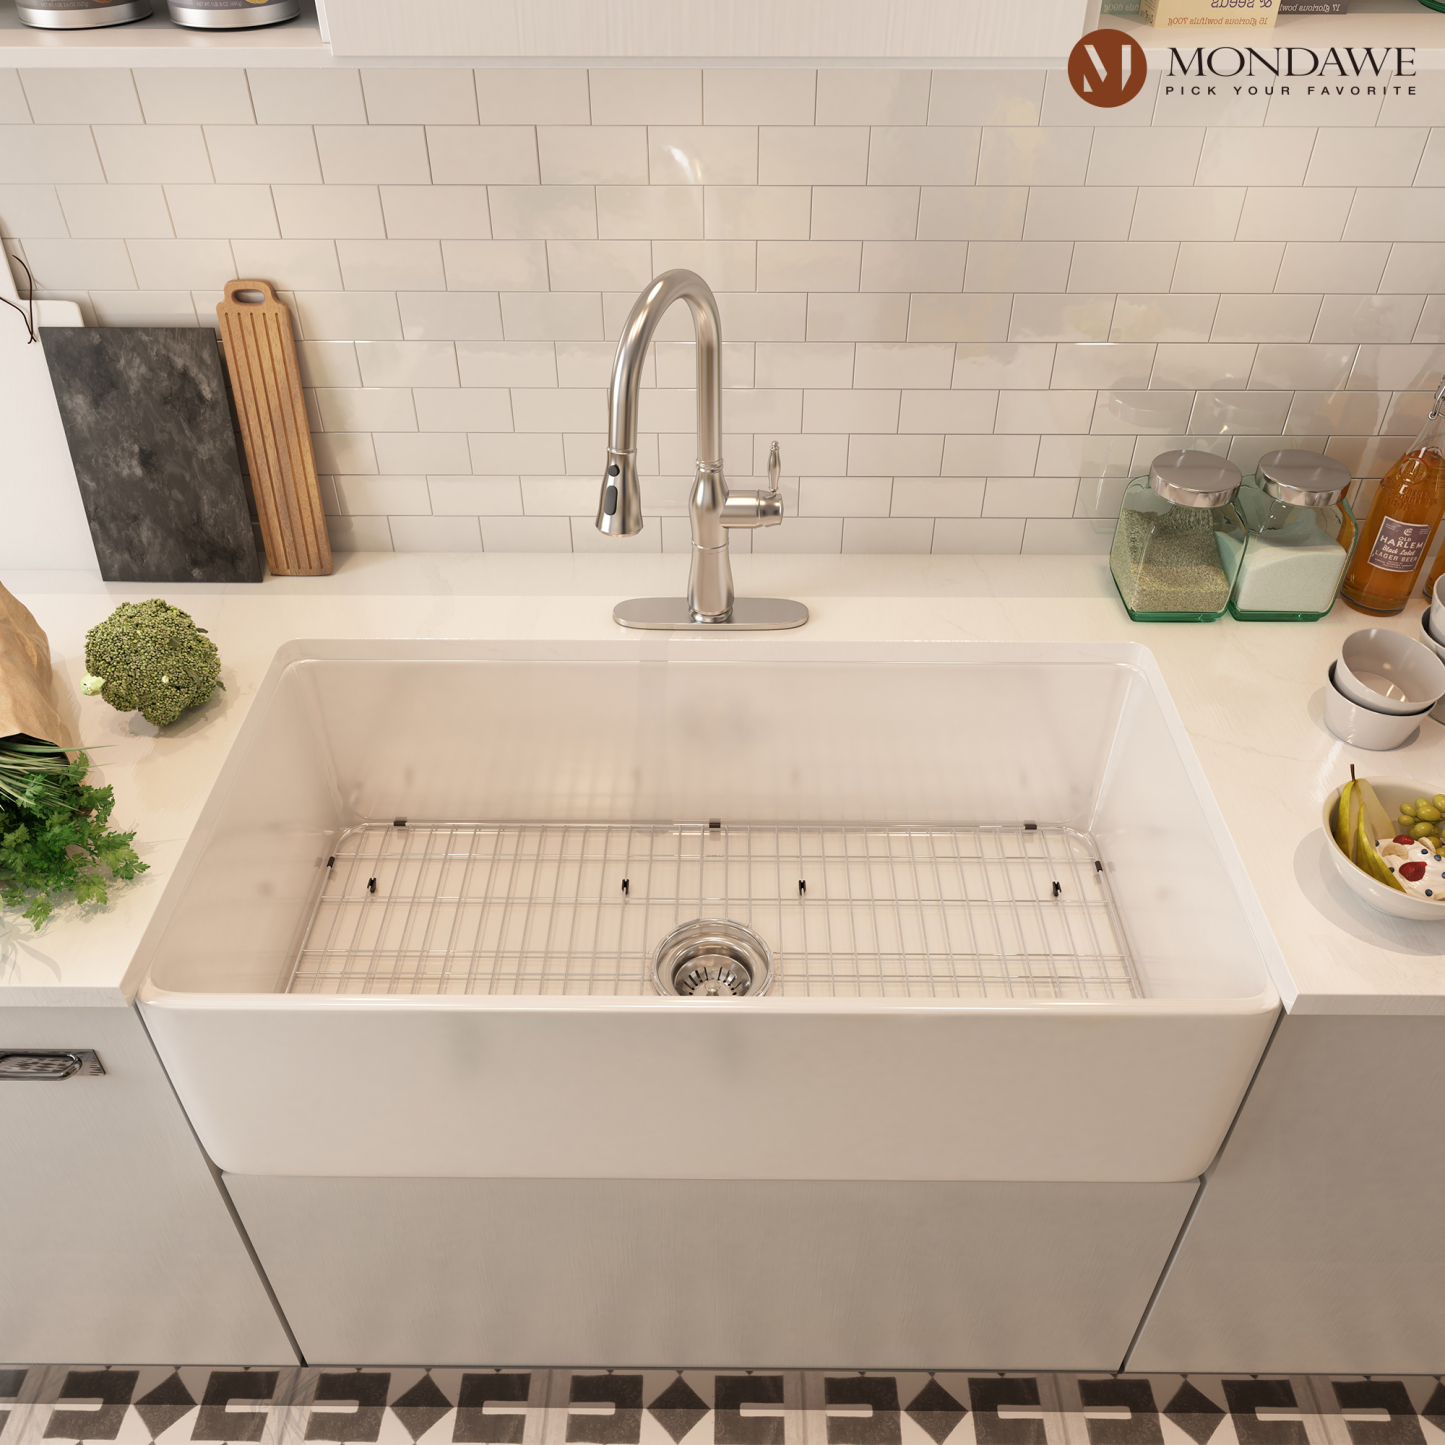 Farmhouse 36 In. Single Bowl Fireclay Kitchen Sink In White Comes With Pull Down Kitchen Faucet-Mondawe